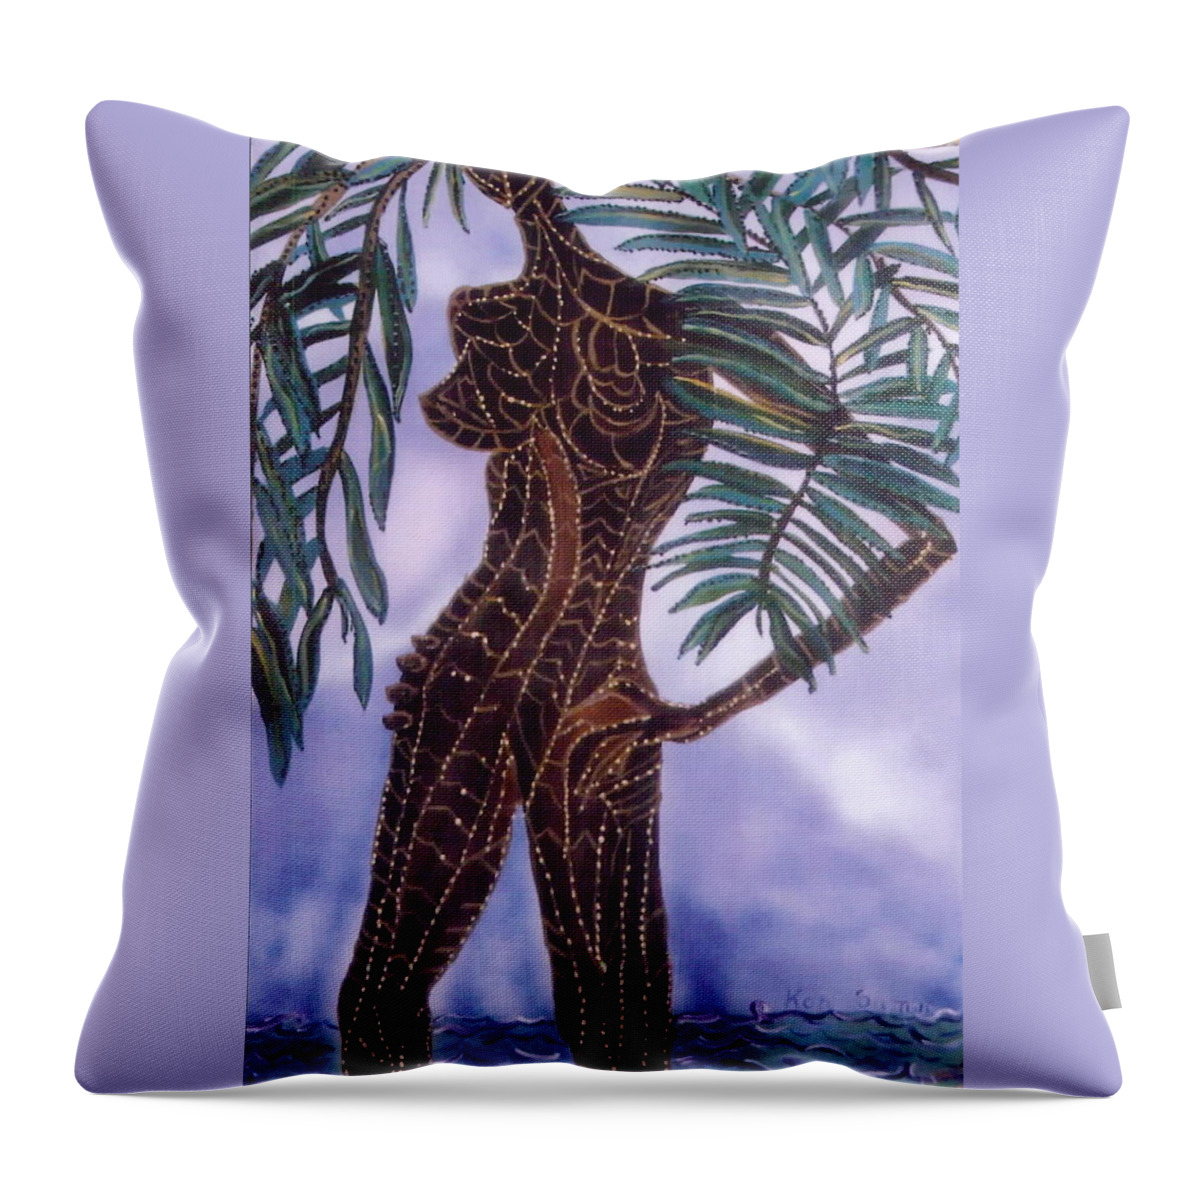  Throw Pillow featuring the painting Koh Samui Island by Lorena Fernandez